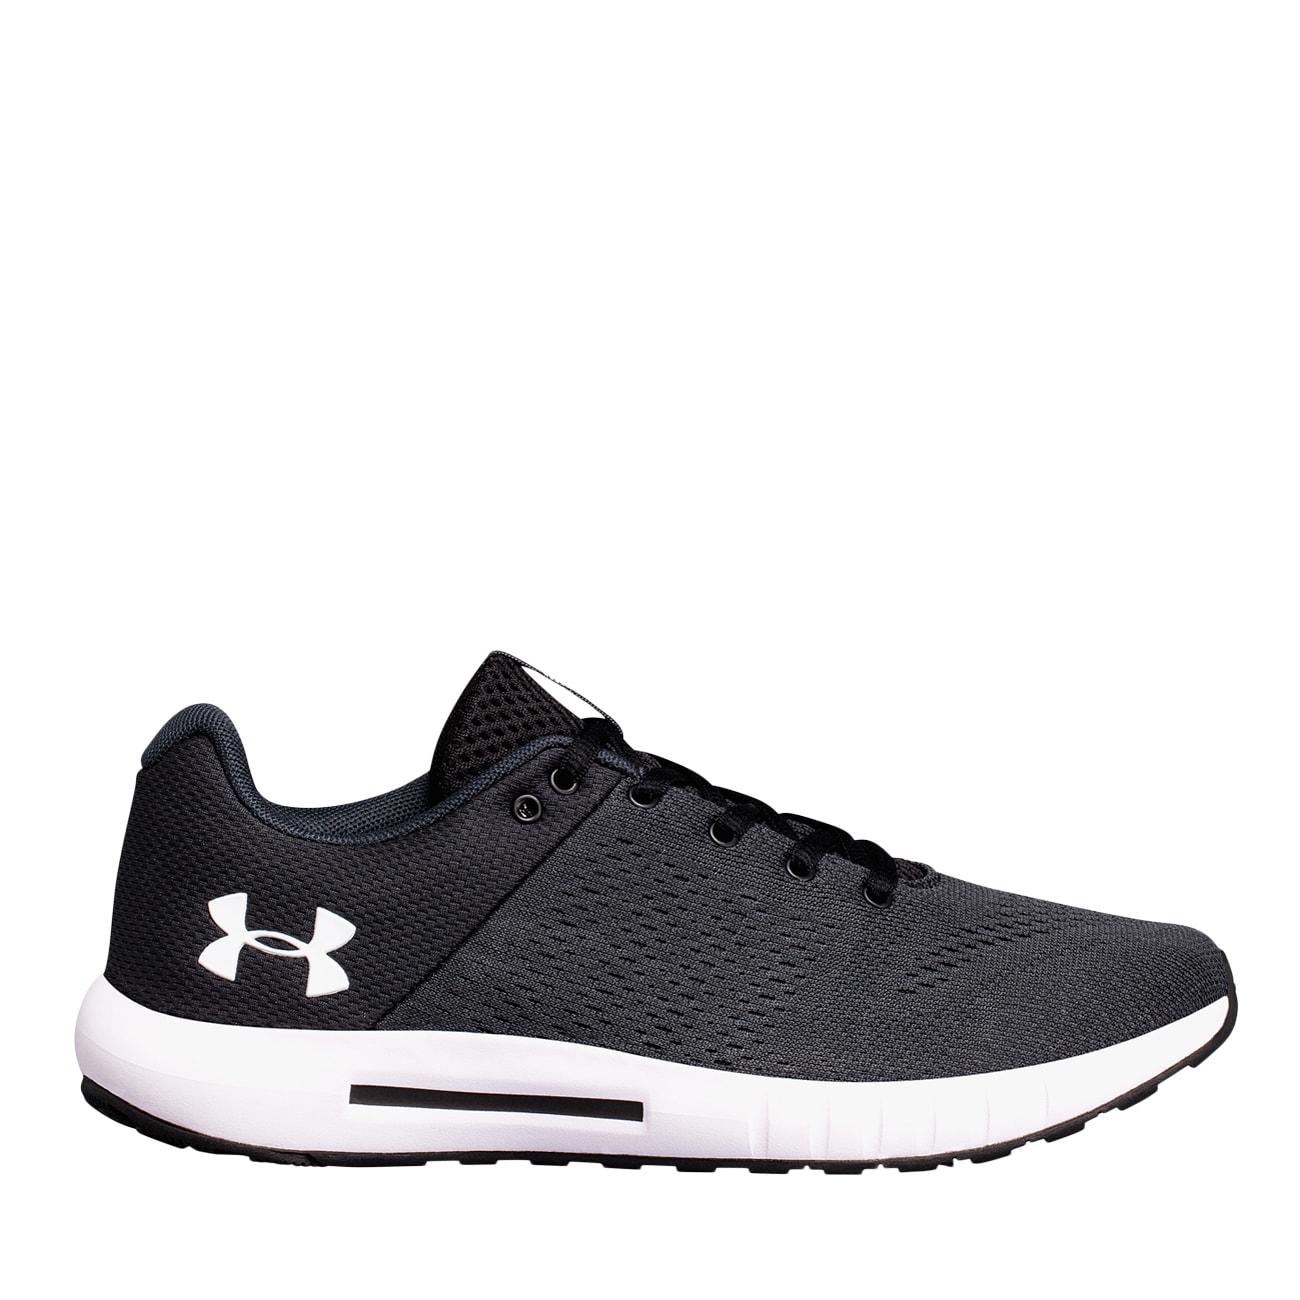 UNDER ARMOUR Women's Micro G Pursuit D Runner | The Shoe Company